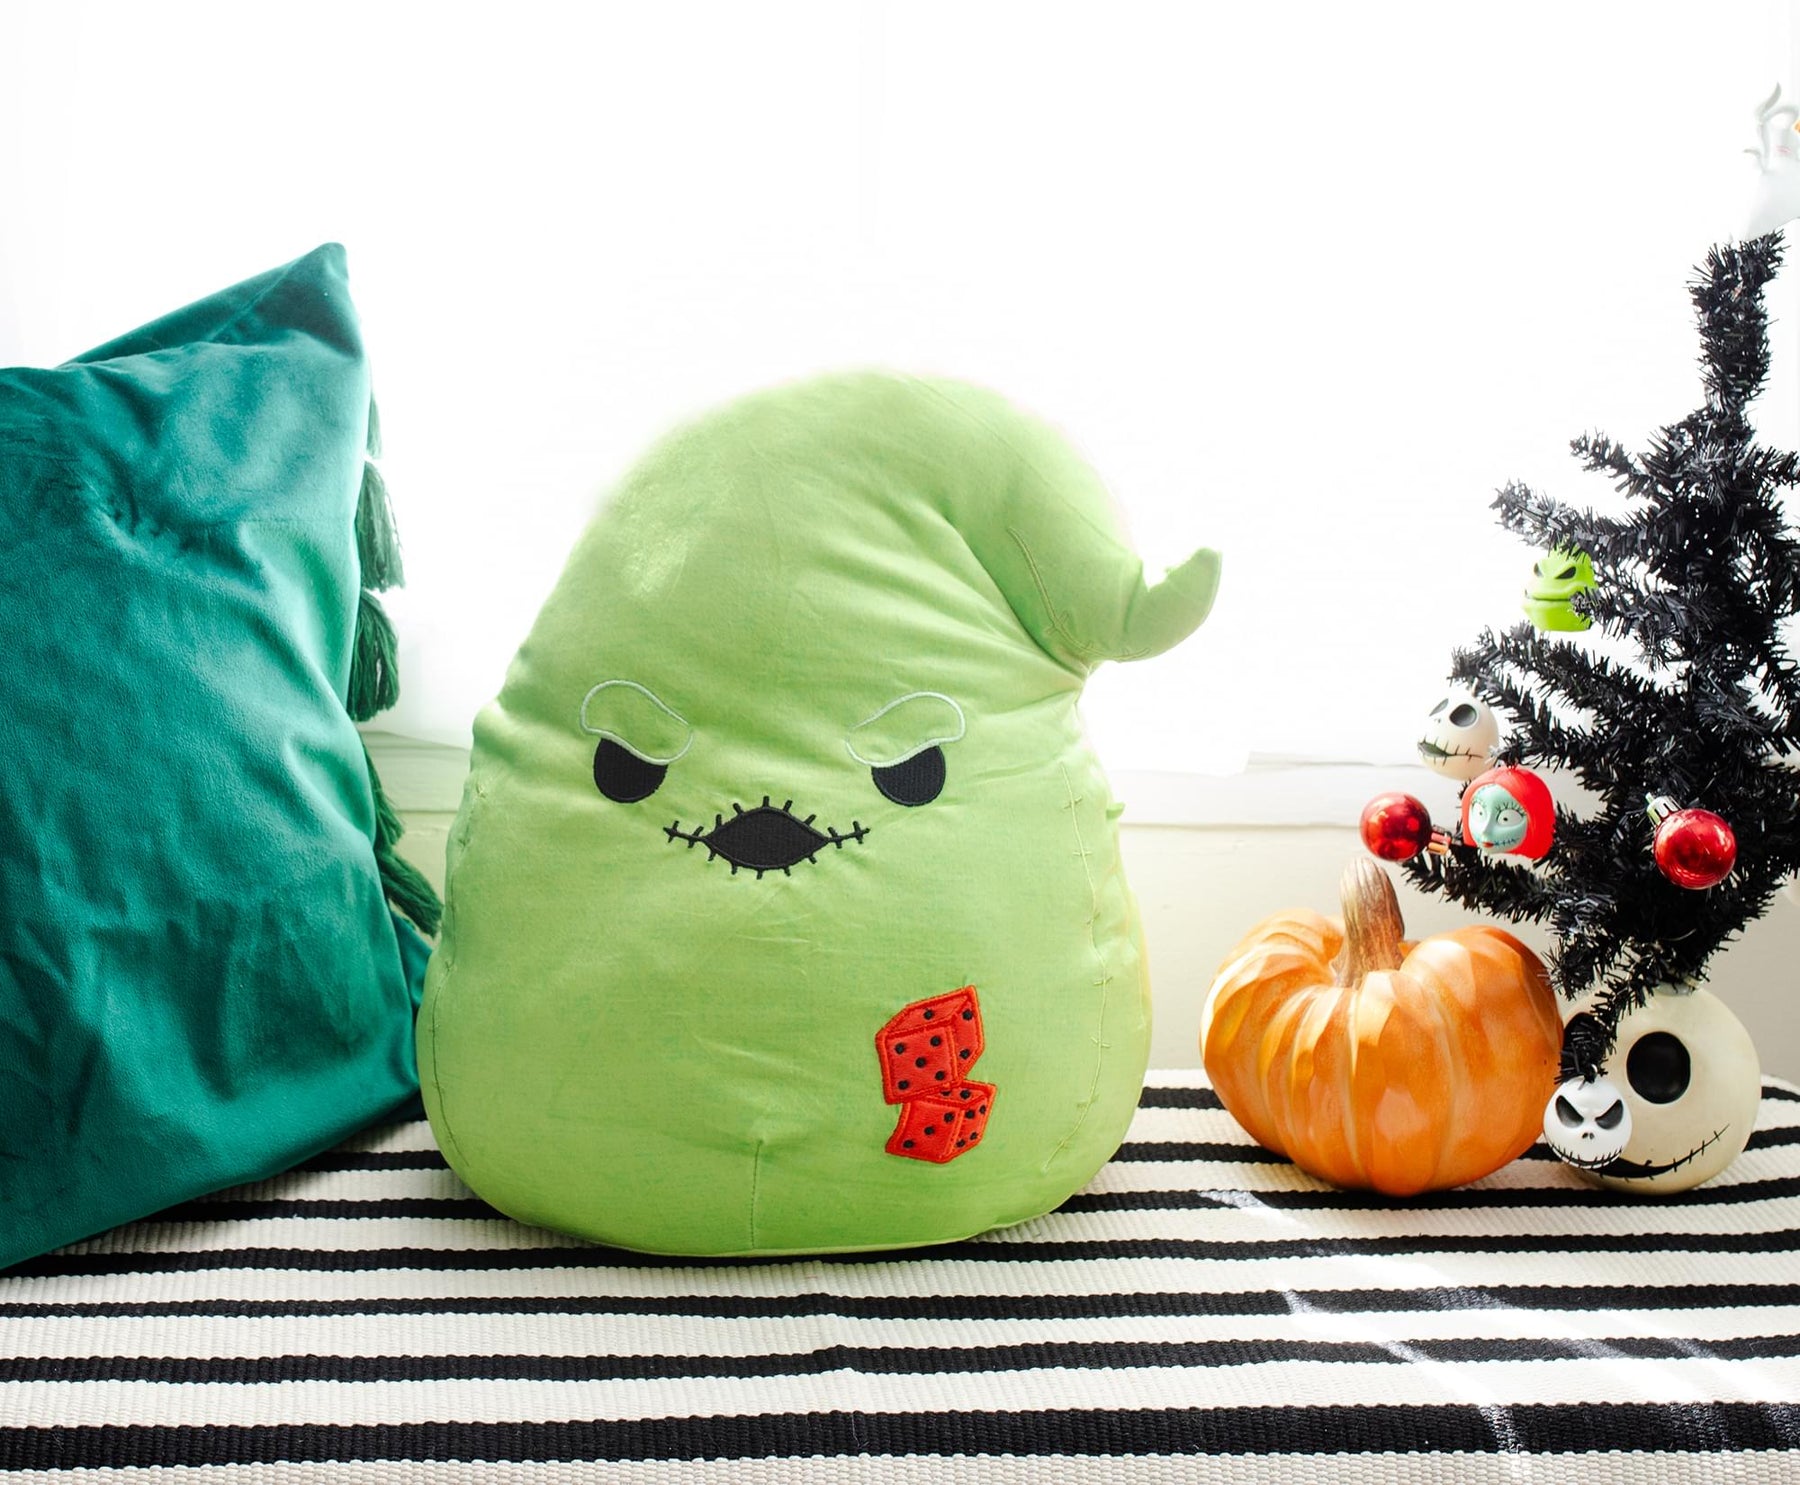 Nightmare Before Christmas Squishmallow 12 Inch Plush | Oogie Boogie